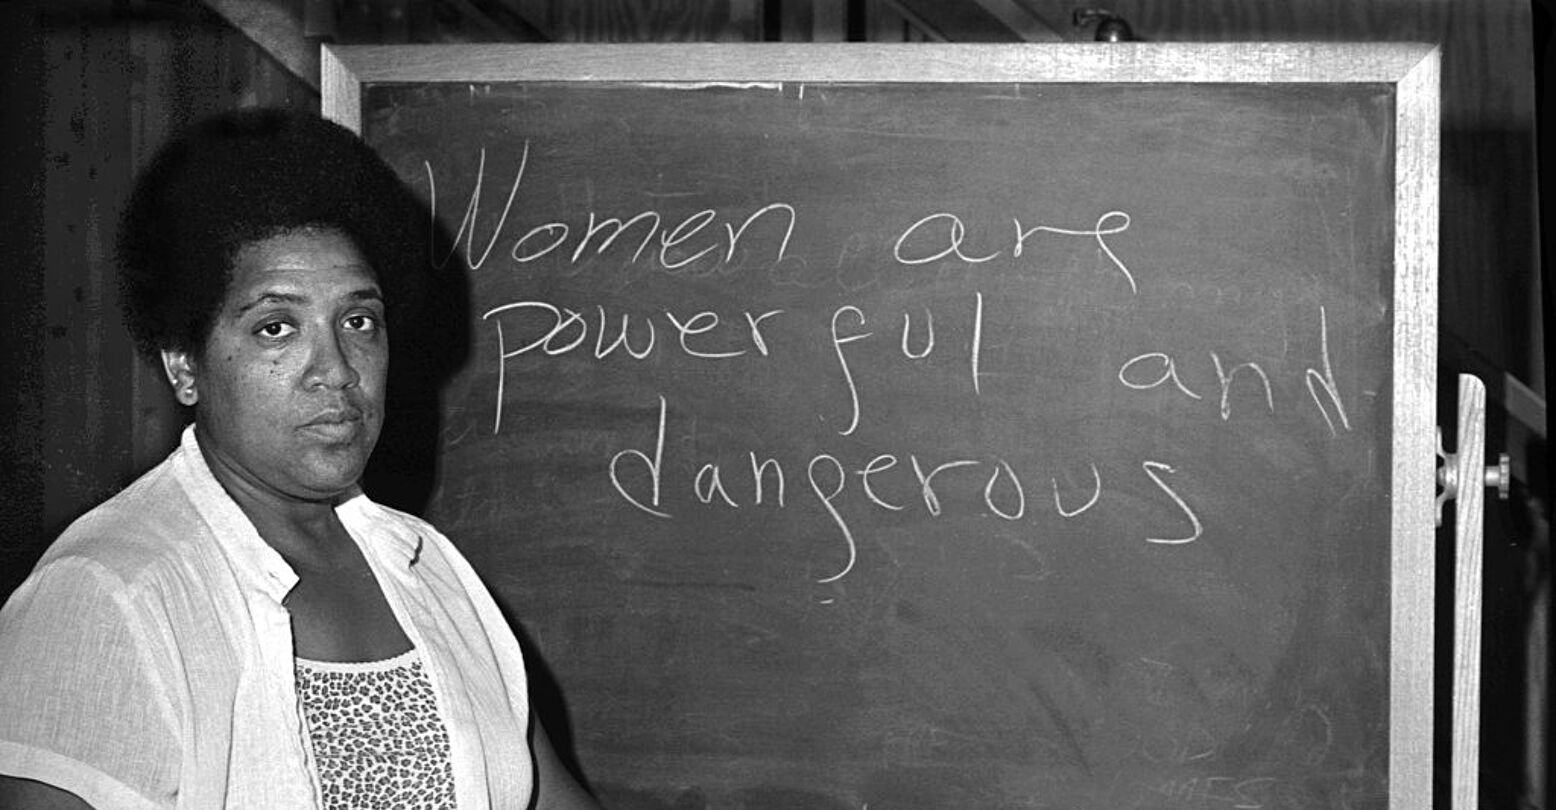 African-American writer, feminist, poet and civil-rights activist Audre Lorde (1934-1992) poses for a photograph during her 1983 residency at the Atlantic Center for the Arts in New Smyrna Beach, Florida. (Photo by Robert Alexander/Getty Images)